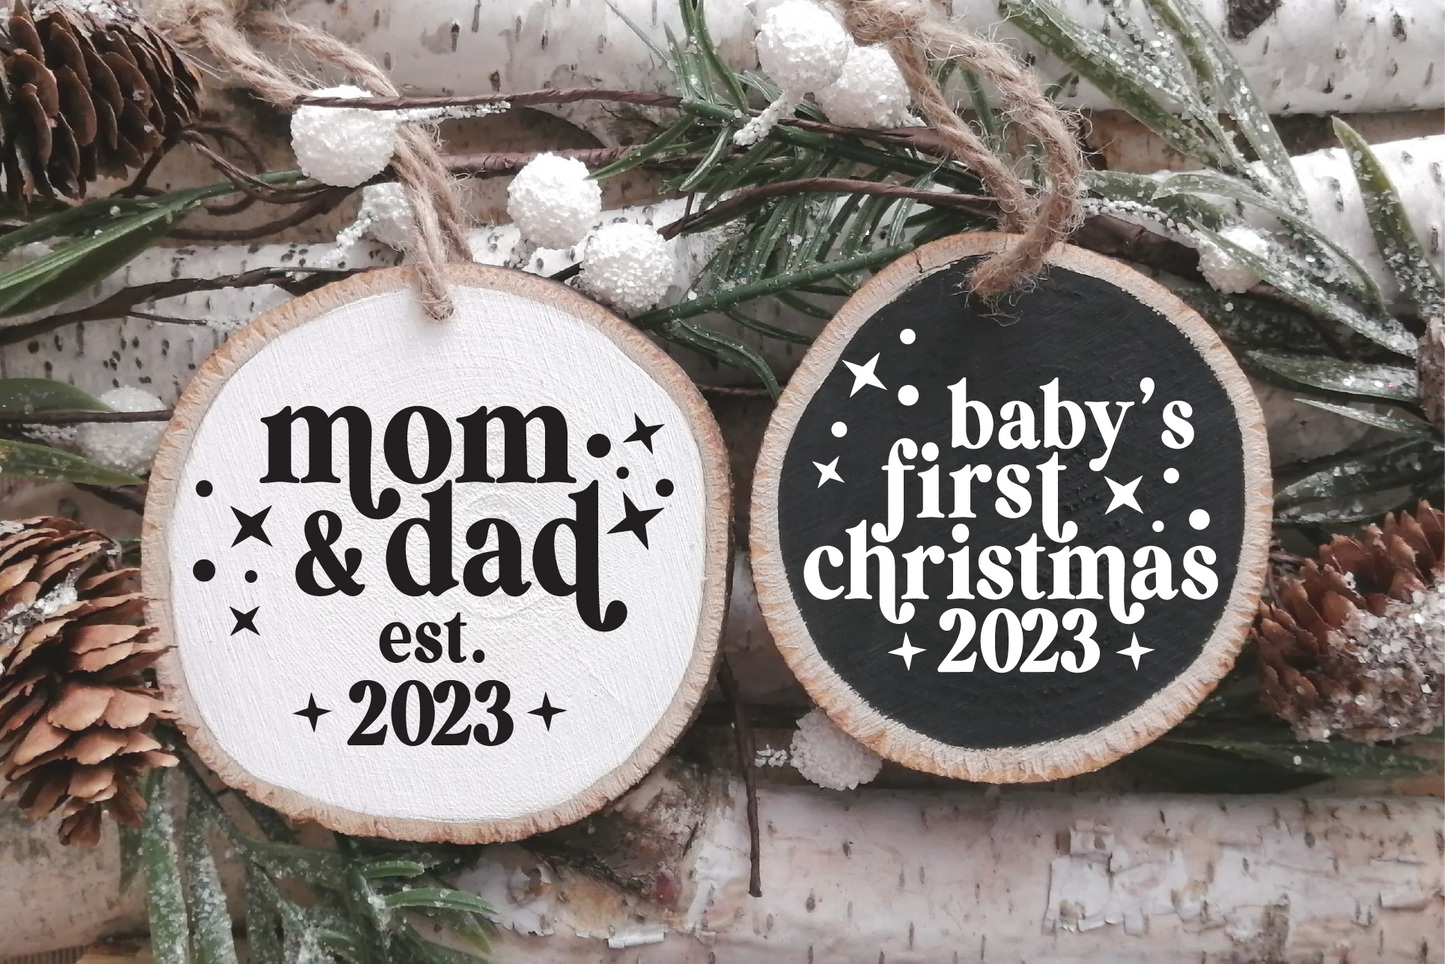 Round Modern Retro Christmas Ornament 2023 Firsts SVG File